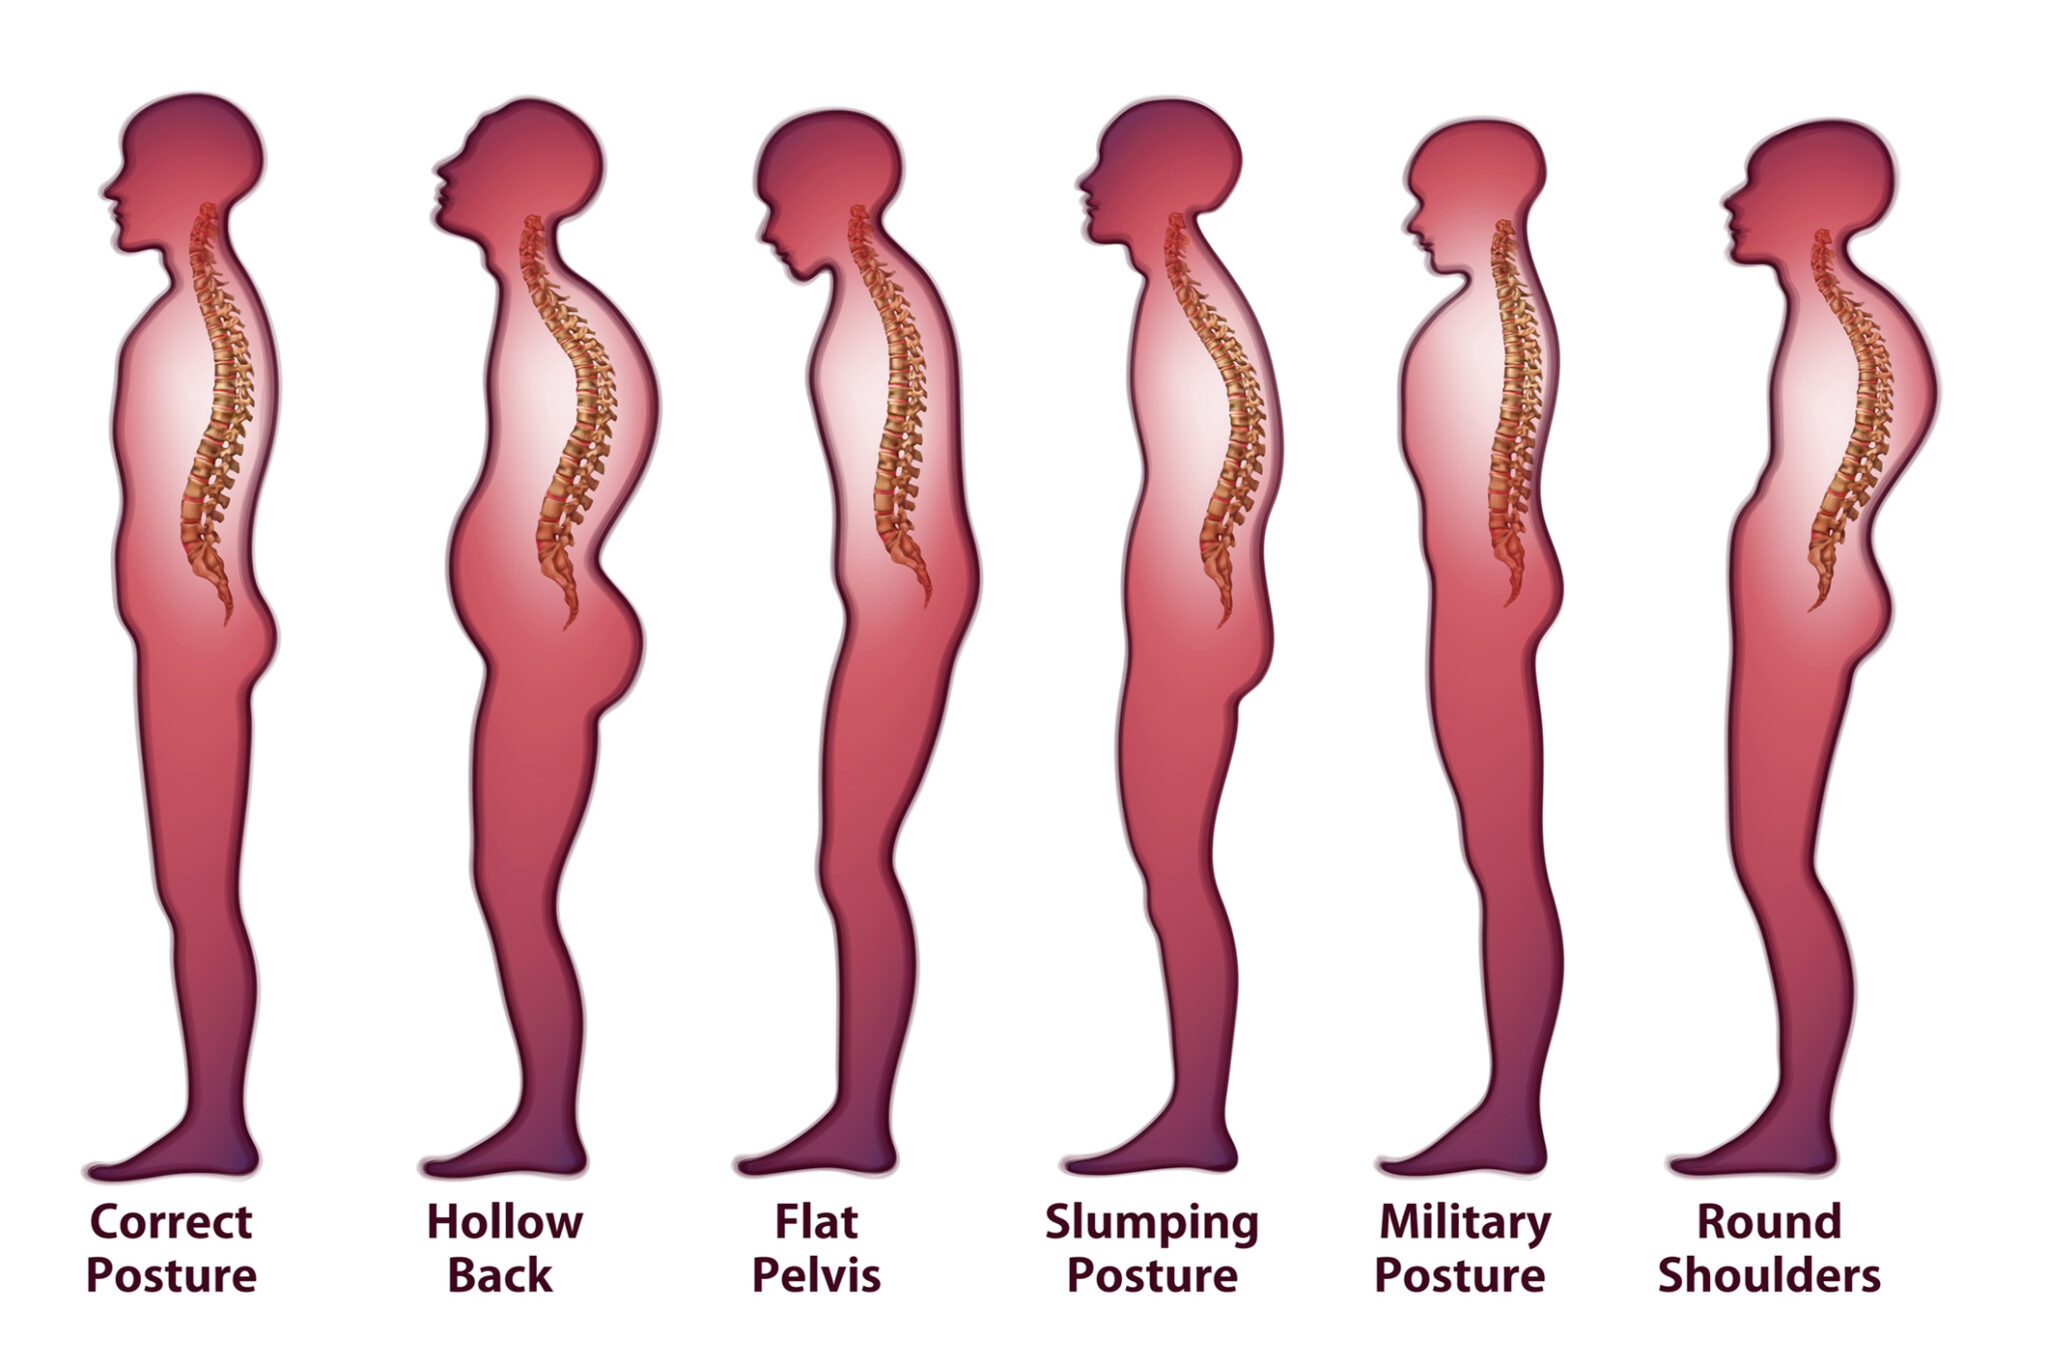 Top Tips To Improve Bad Posture And Have Good Posture